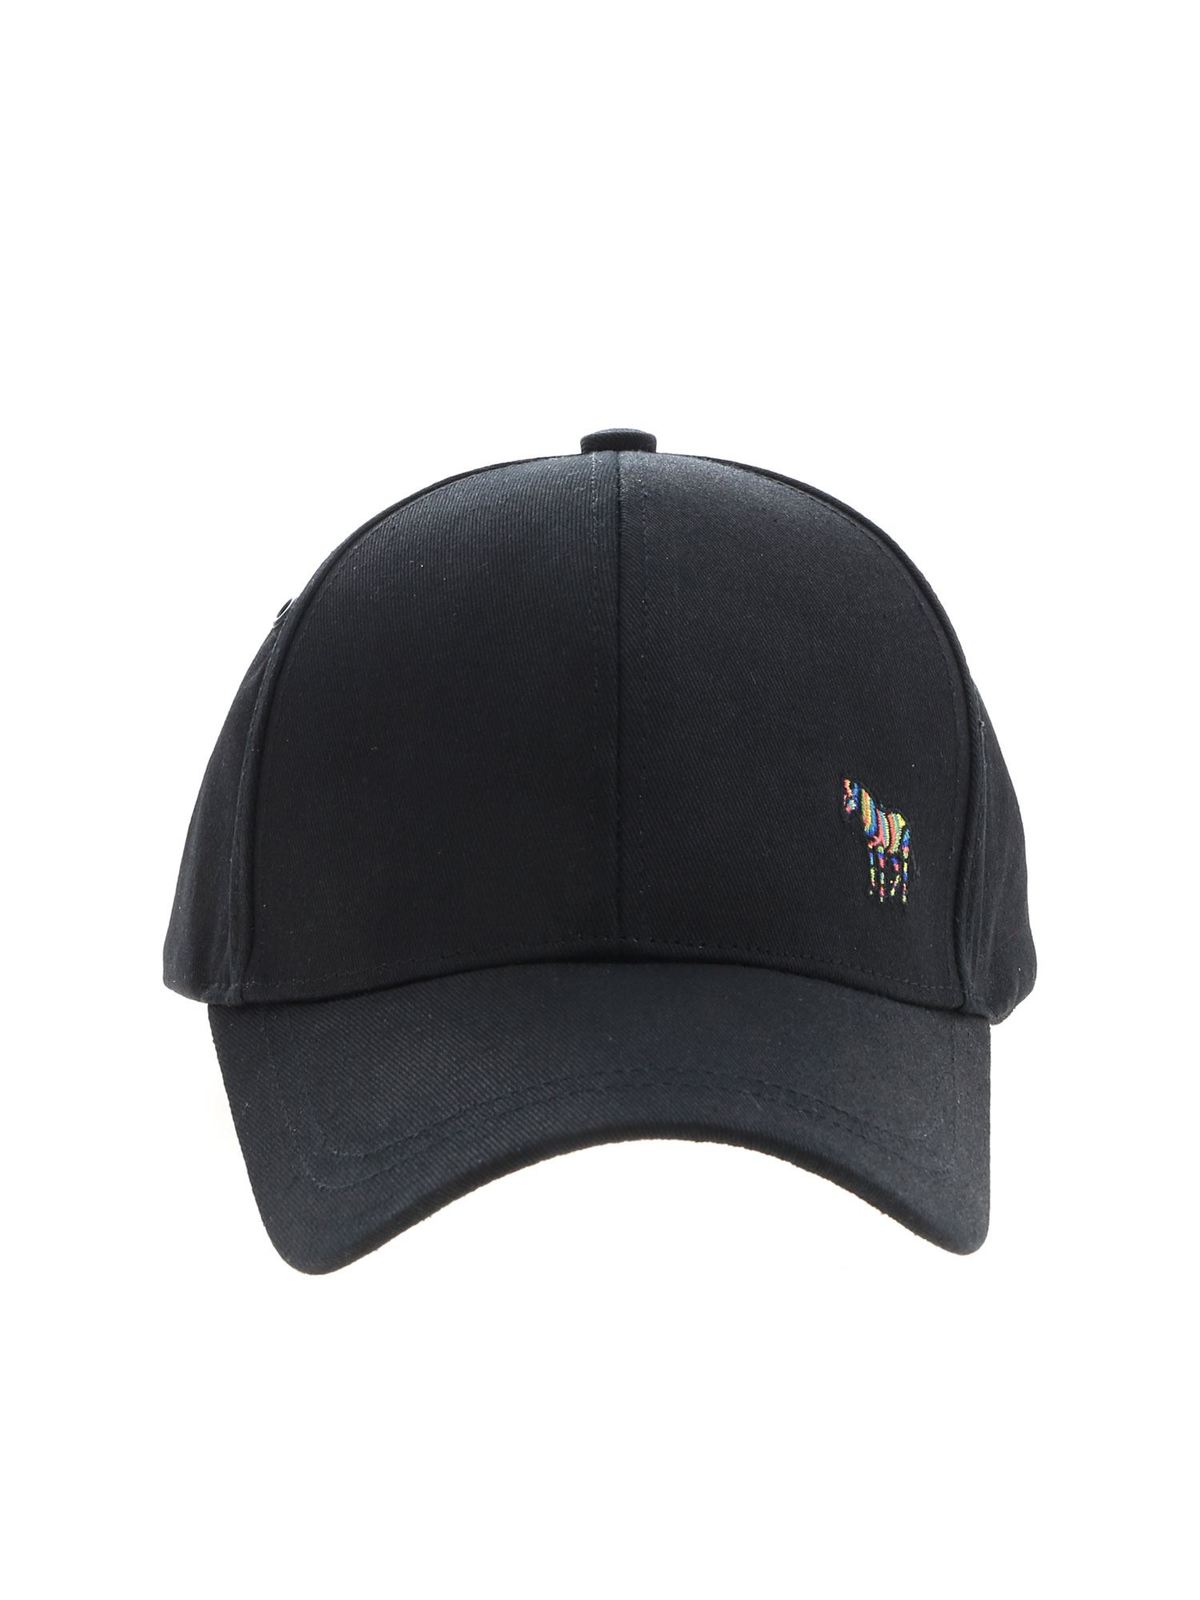 Ps By Paul Smith Black Baseball Hat With Zebra Embroidery